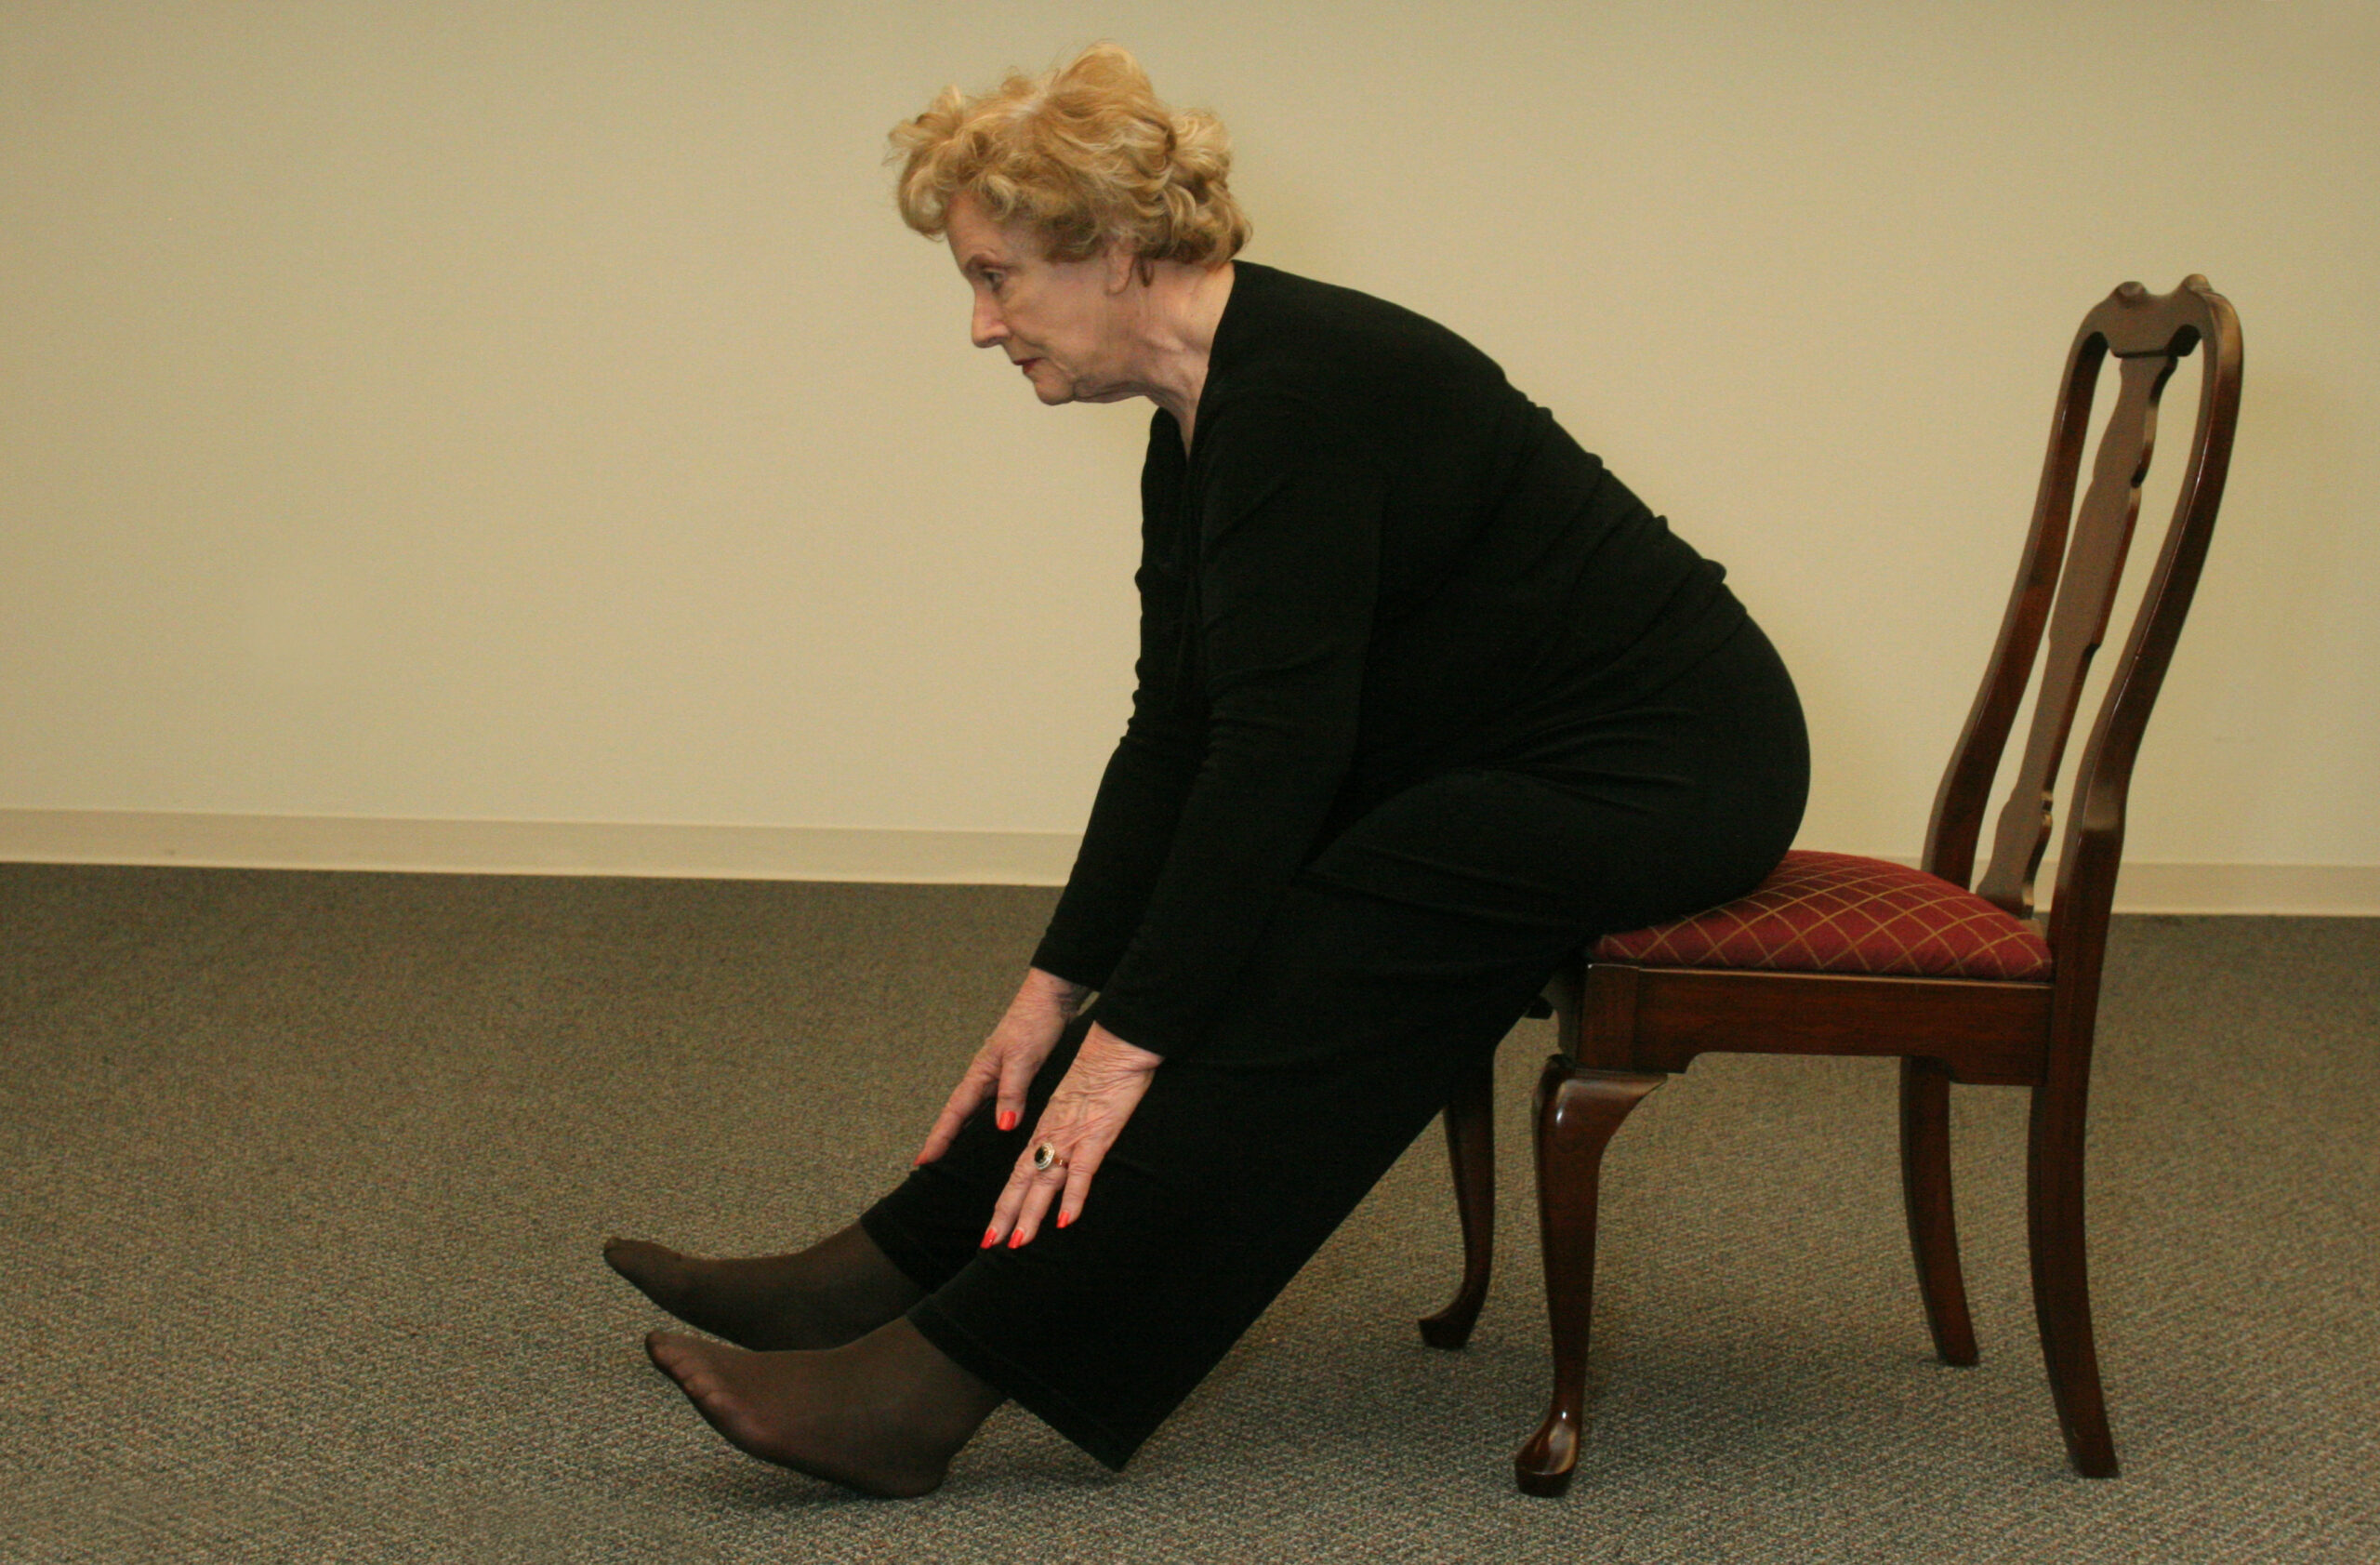 Older Woman Sitting on Chair Stretching
